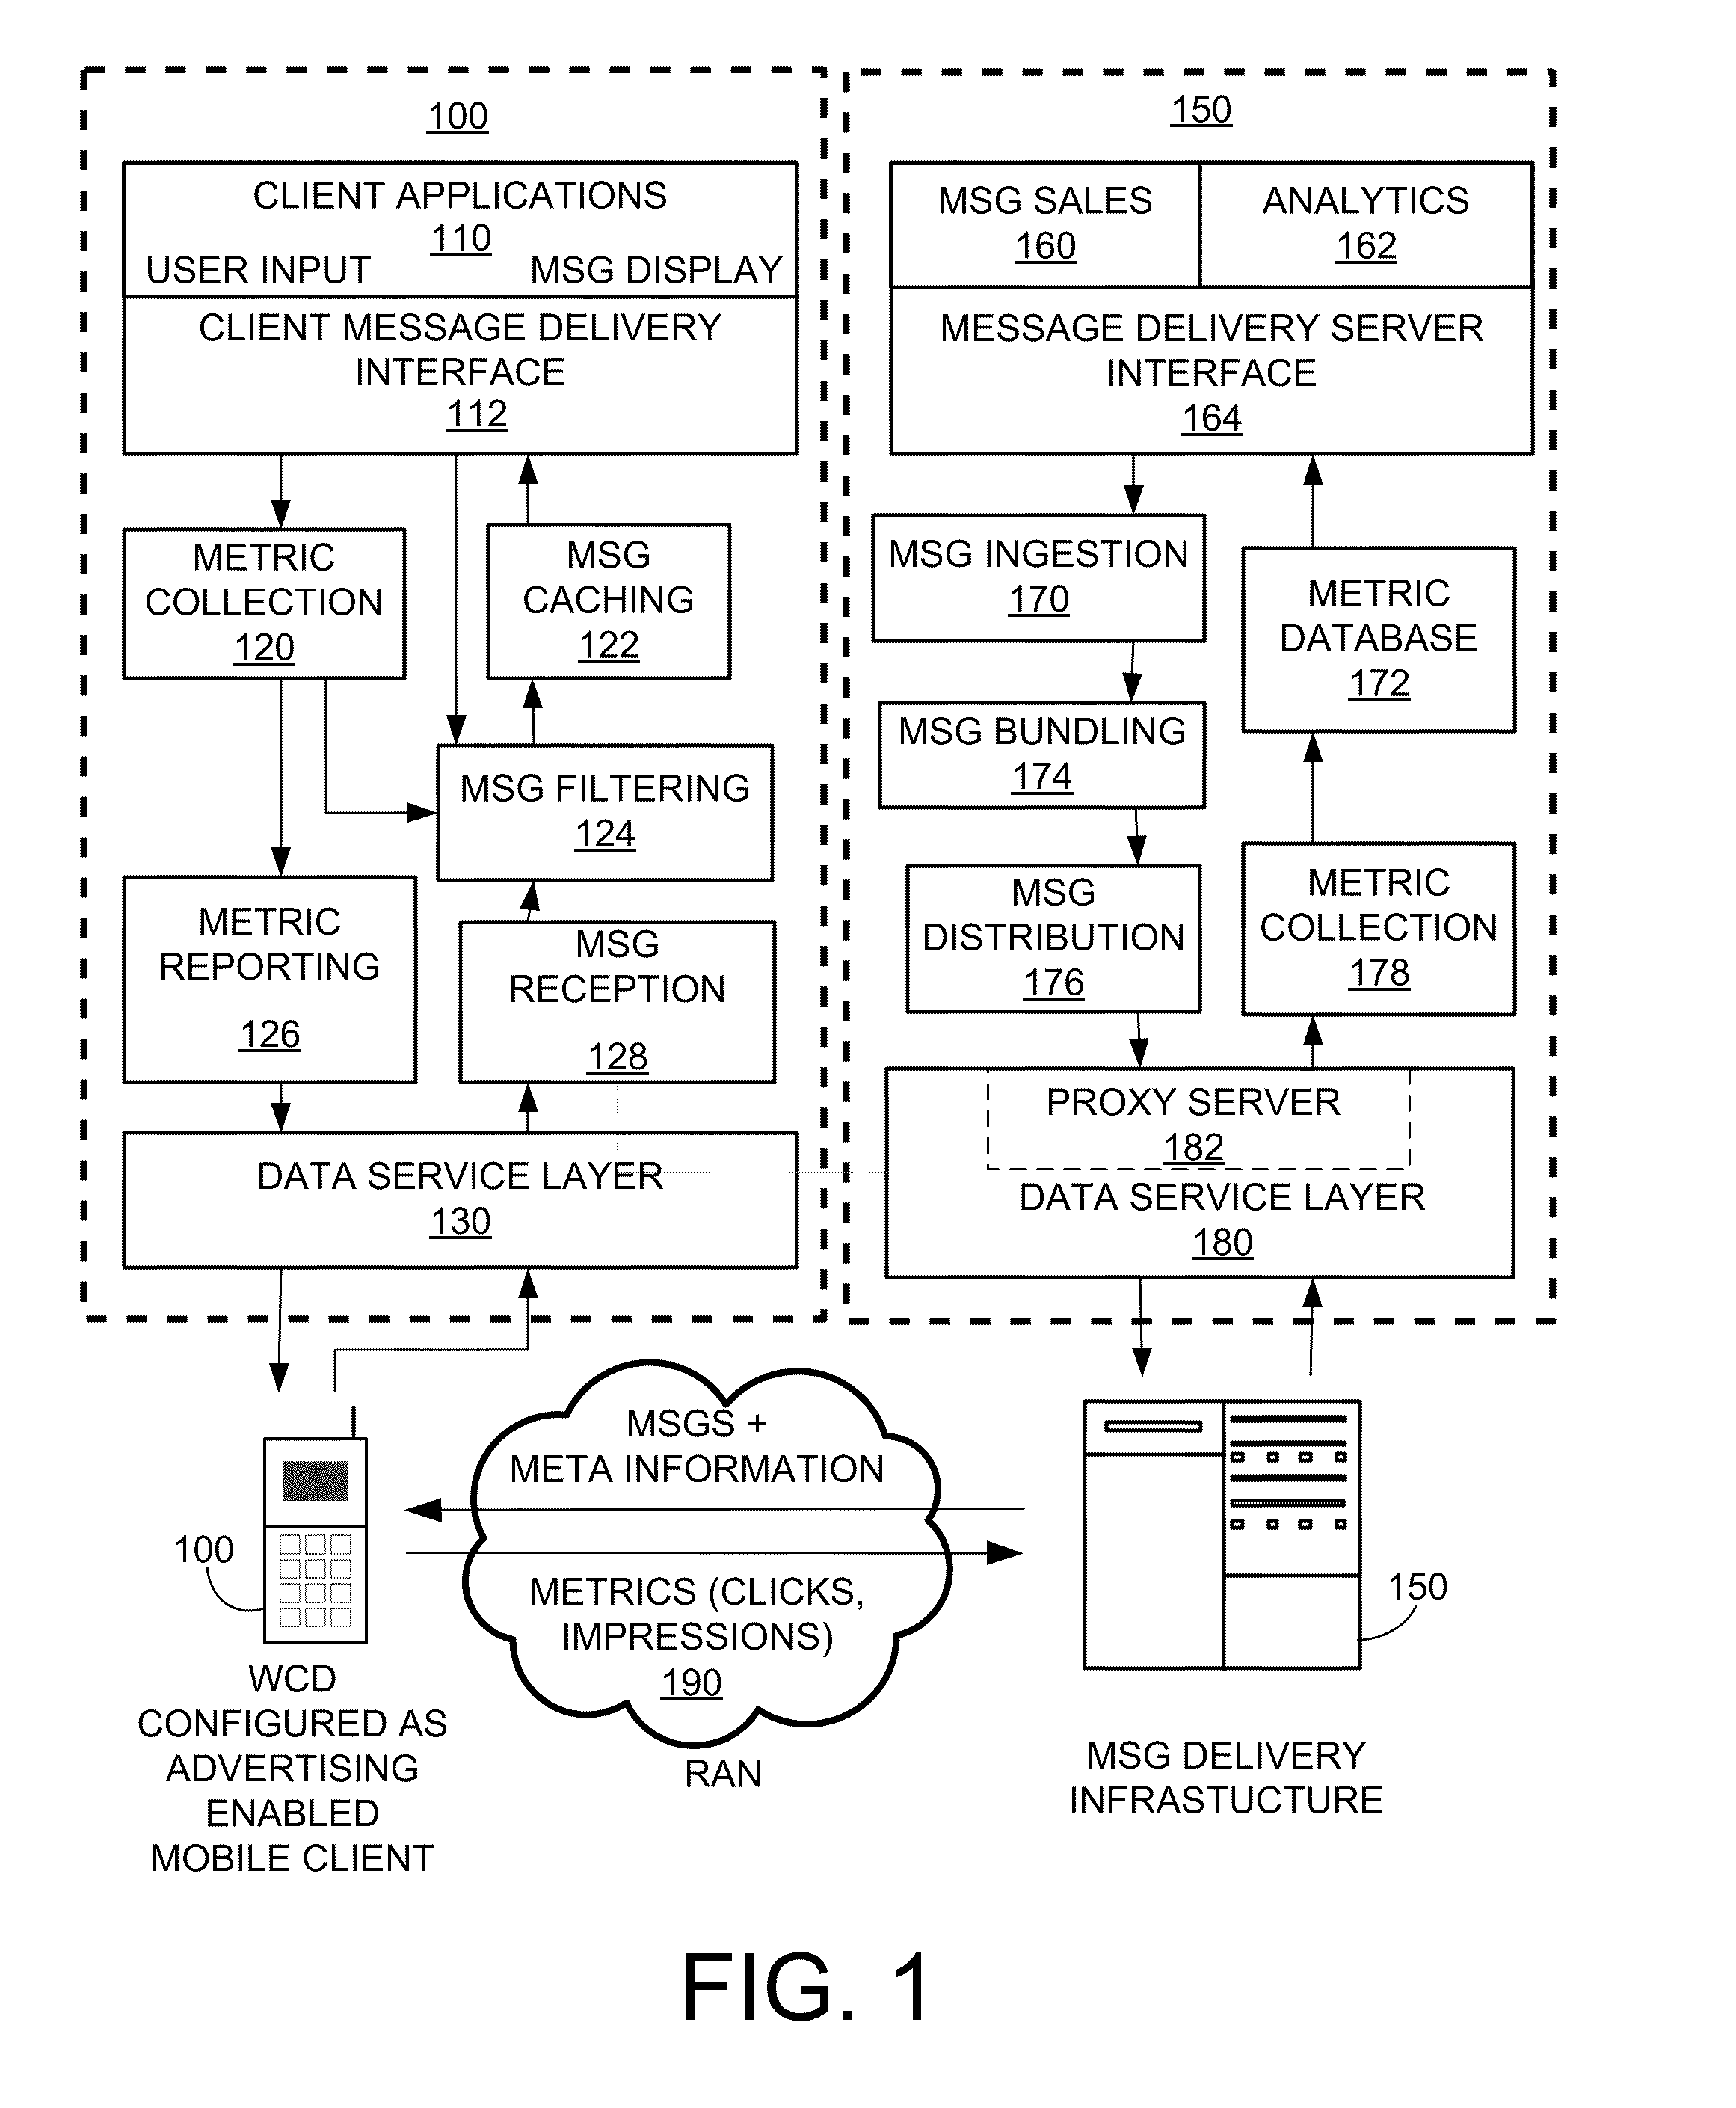 Near field communication transactions in a mobile environment